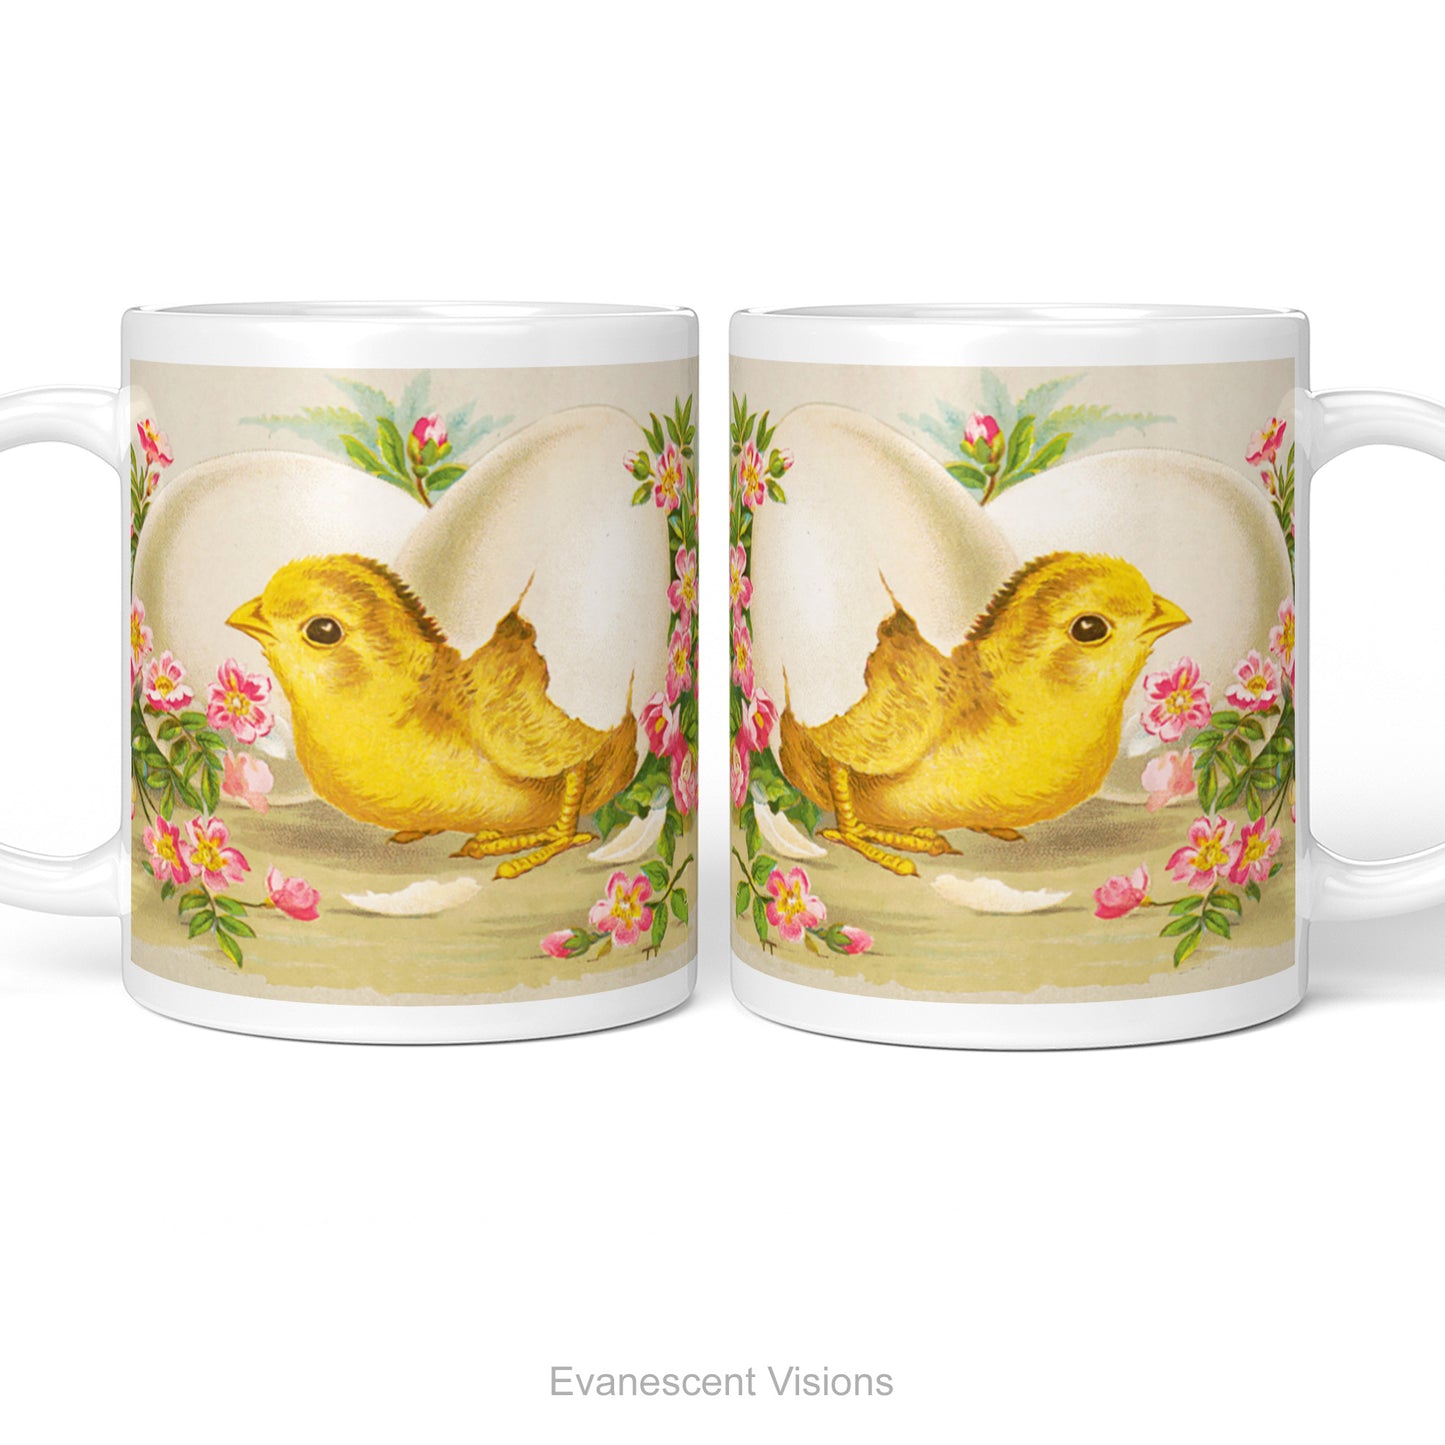 Both sides of mug shown with design of Easter Chick breaking out of an egg surrounded by pink flowers